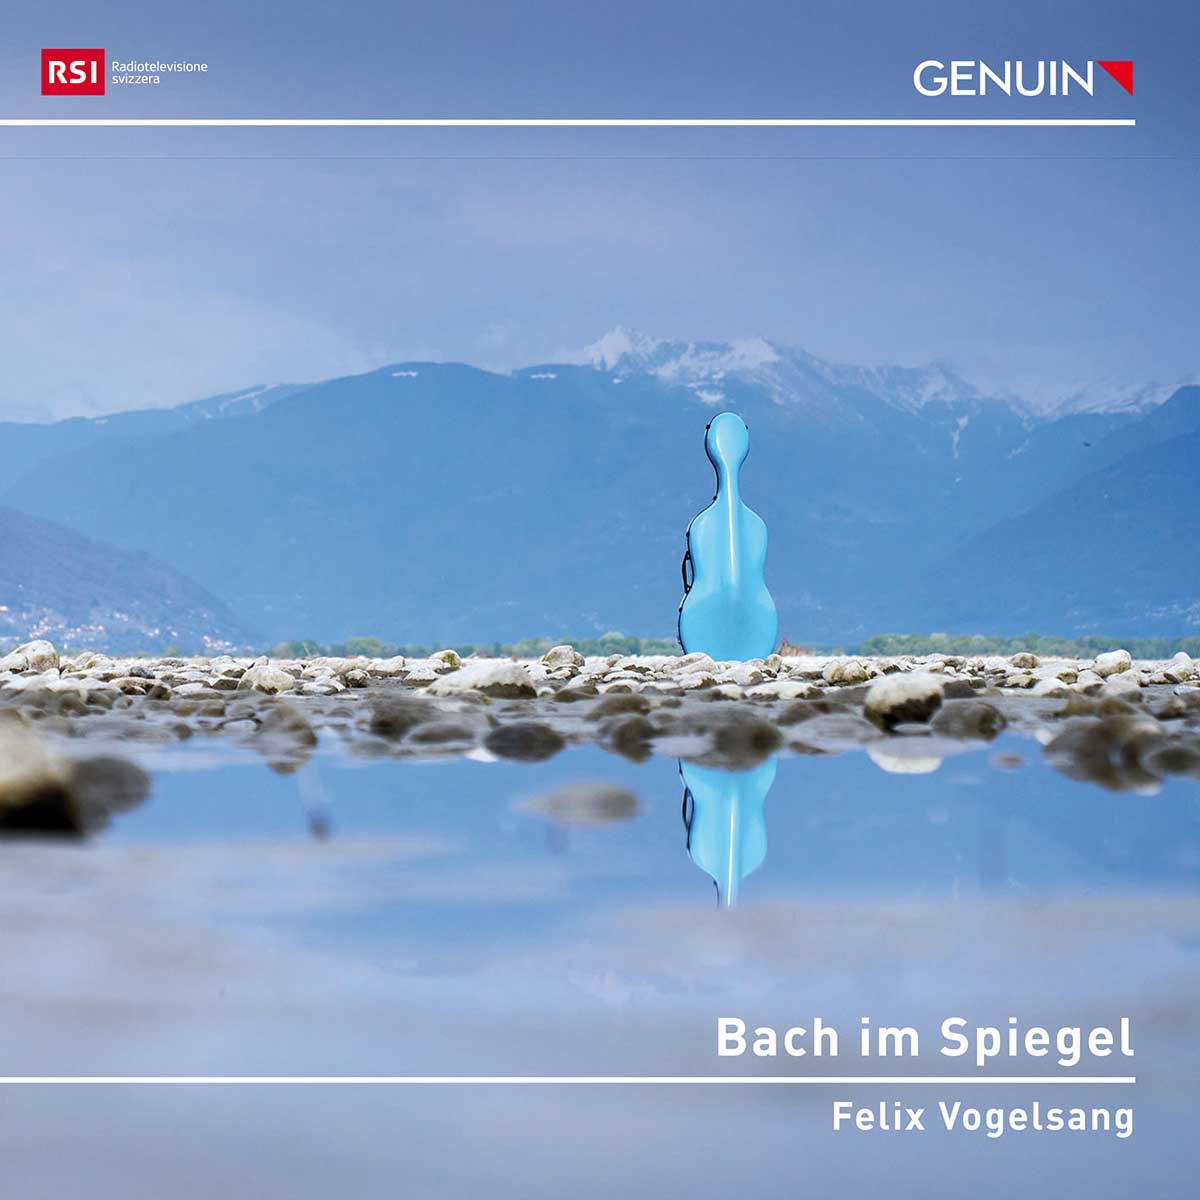 CD album cover 'Bach im Spiegel  Bach in the Mirror' (GEN 23821) with Felix Vogelsang